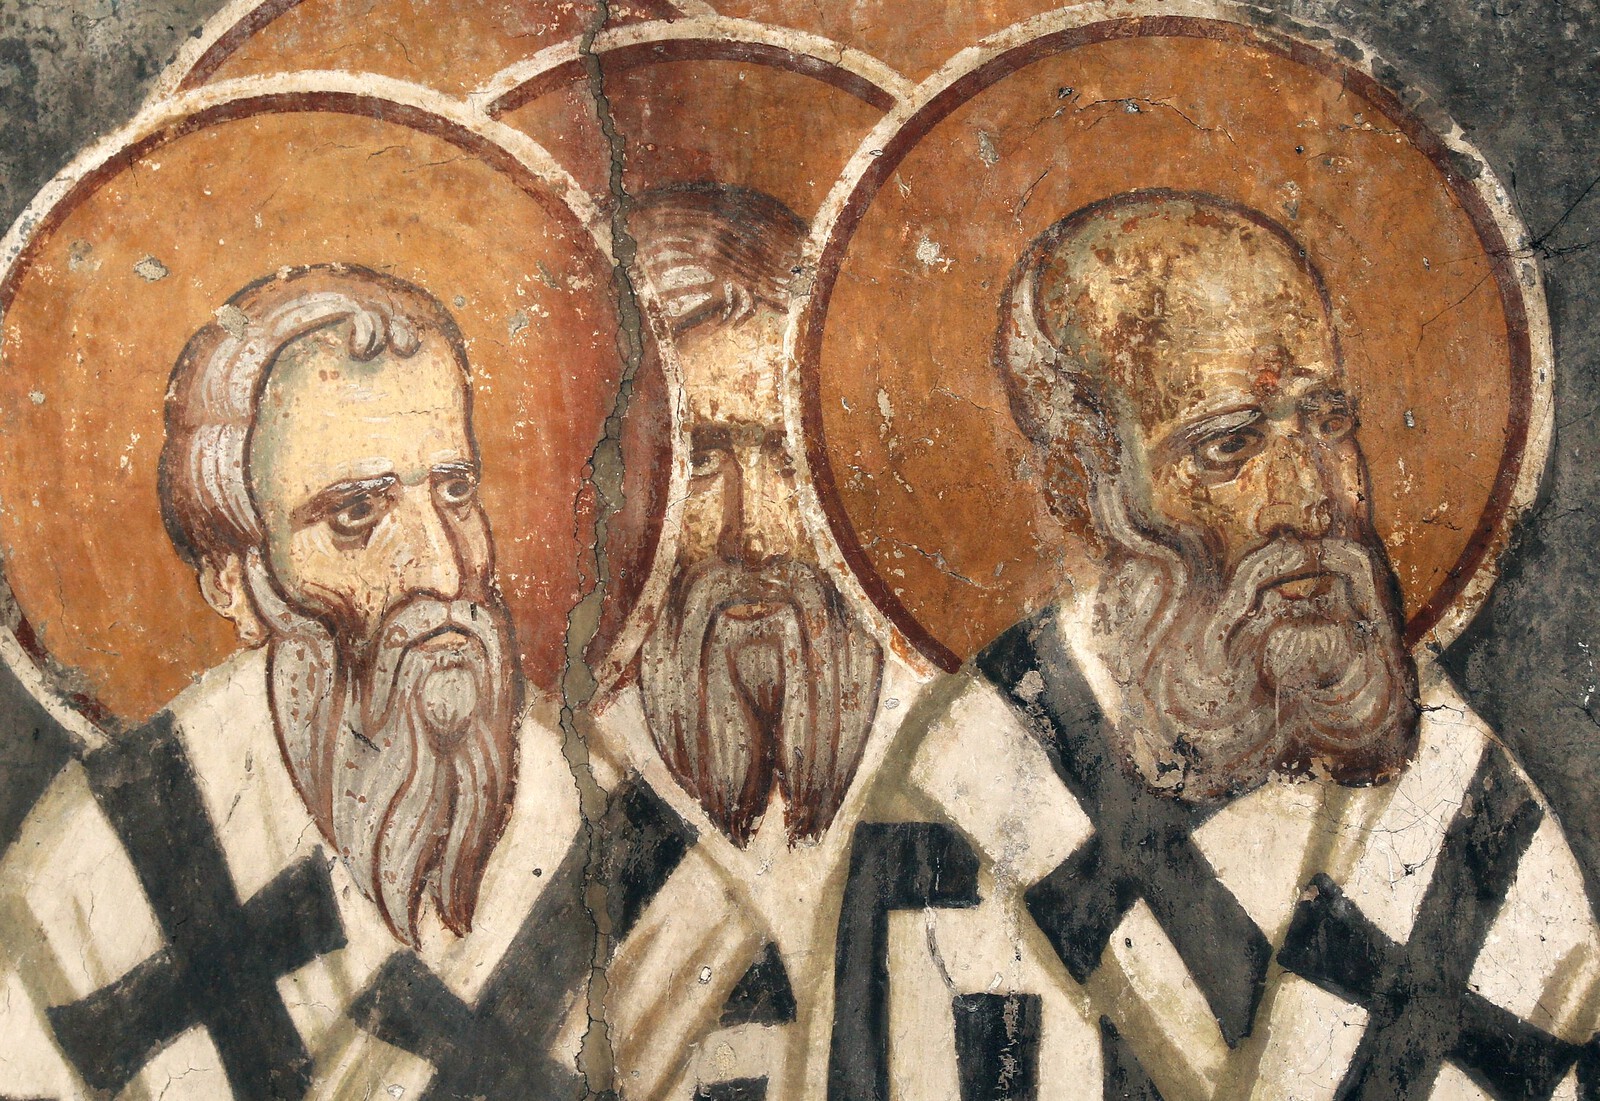 The Forth Ecumenical council, detail